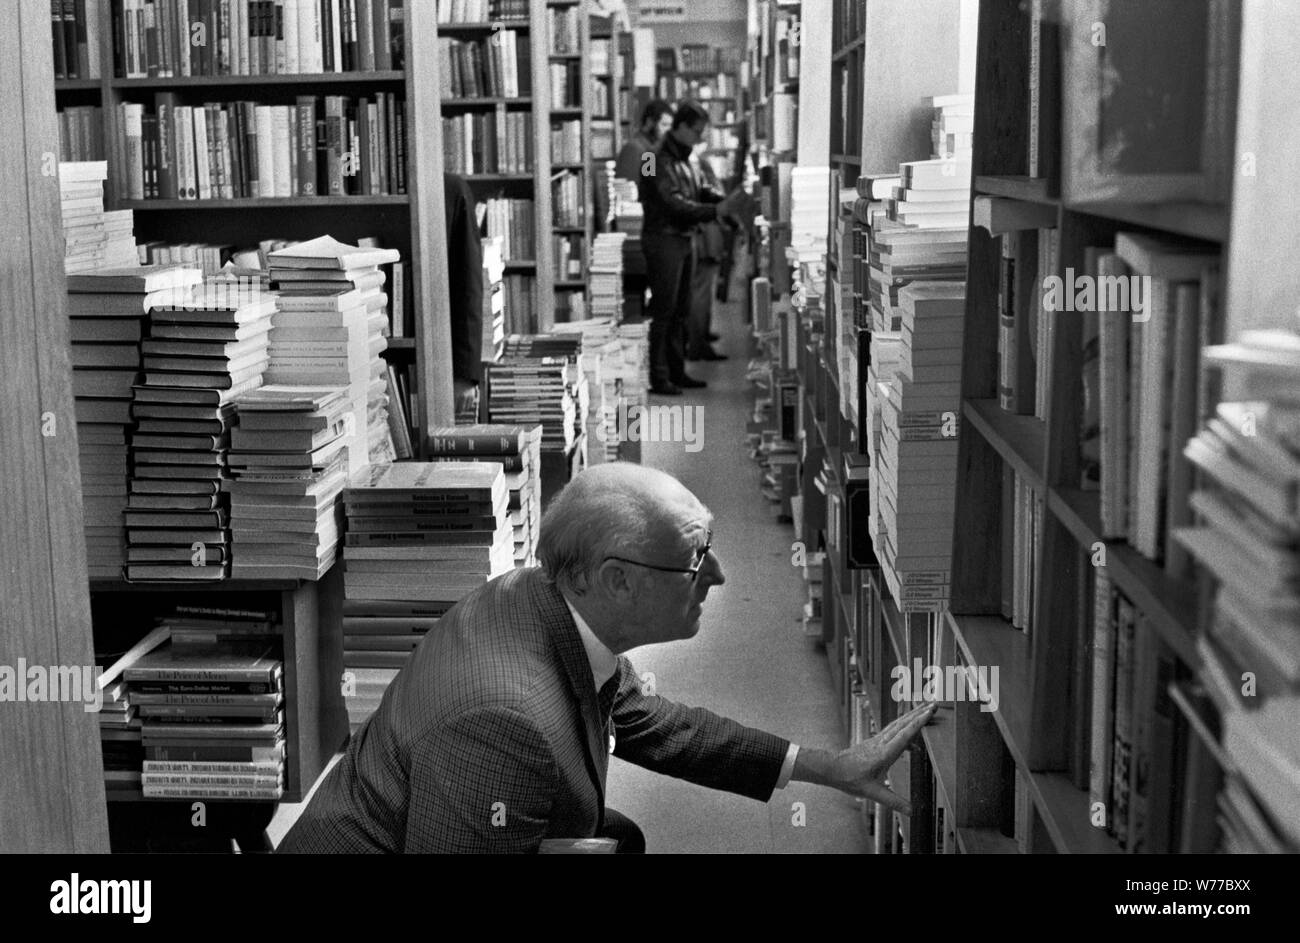 1970s bookshops people browsing selecting books crowded busy London book shop 70s UK HOMER SYKES Stock Photo